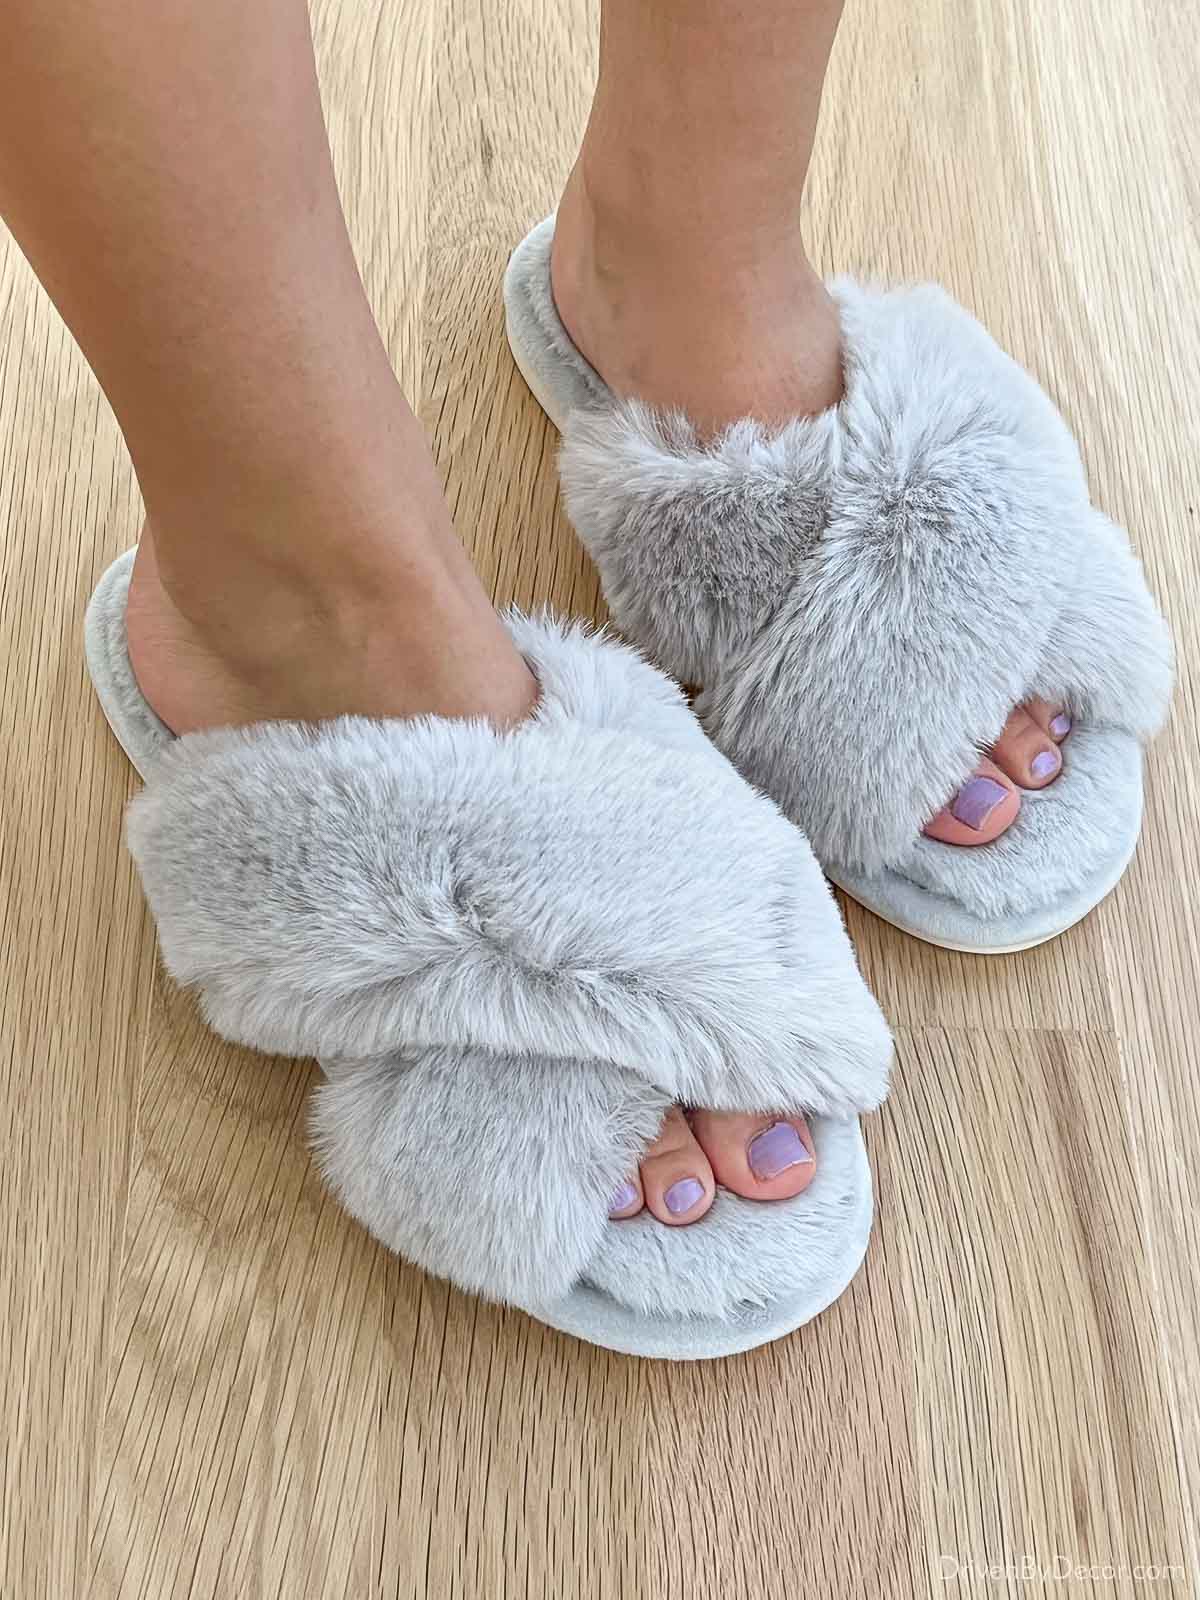 Love these fuzzy slippers for teens! A great Christmas gift idea!